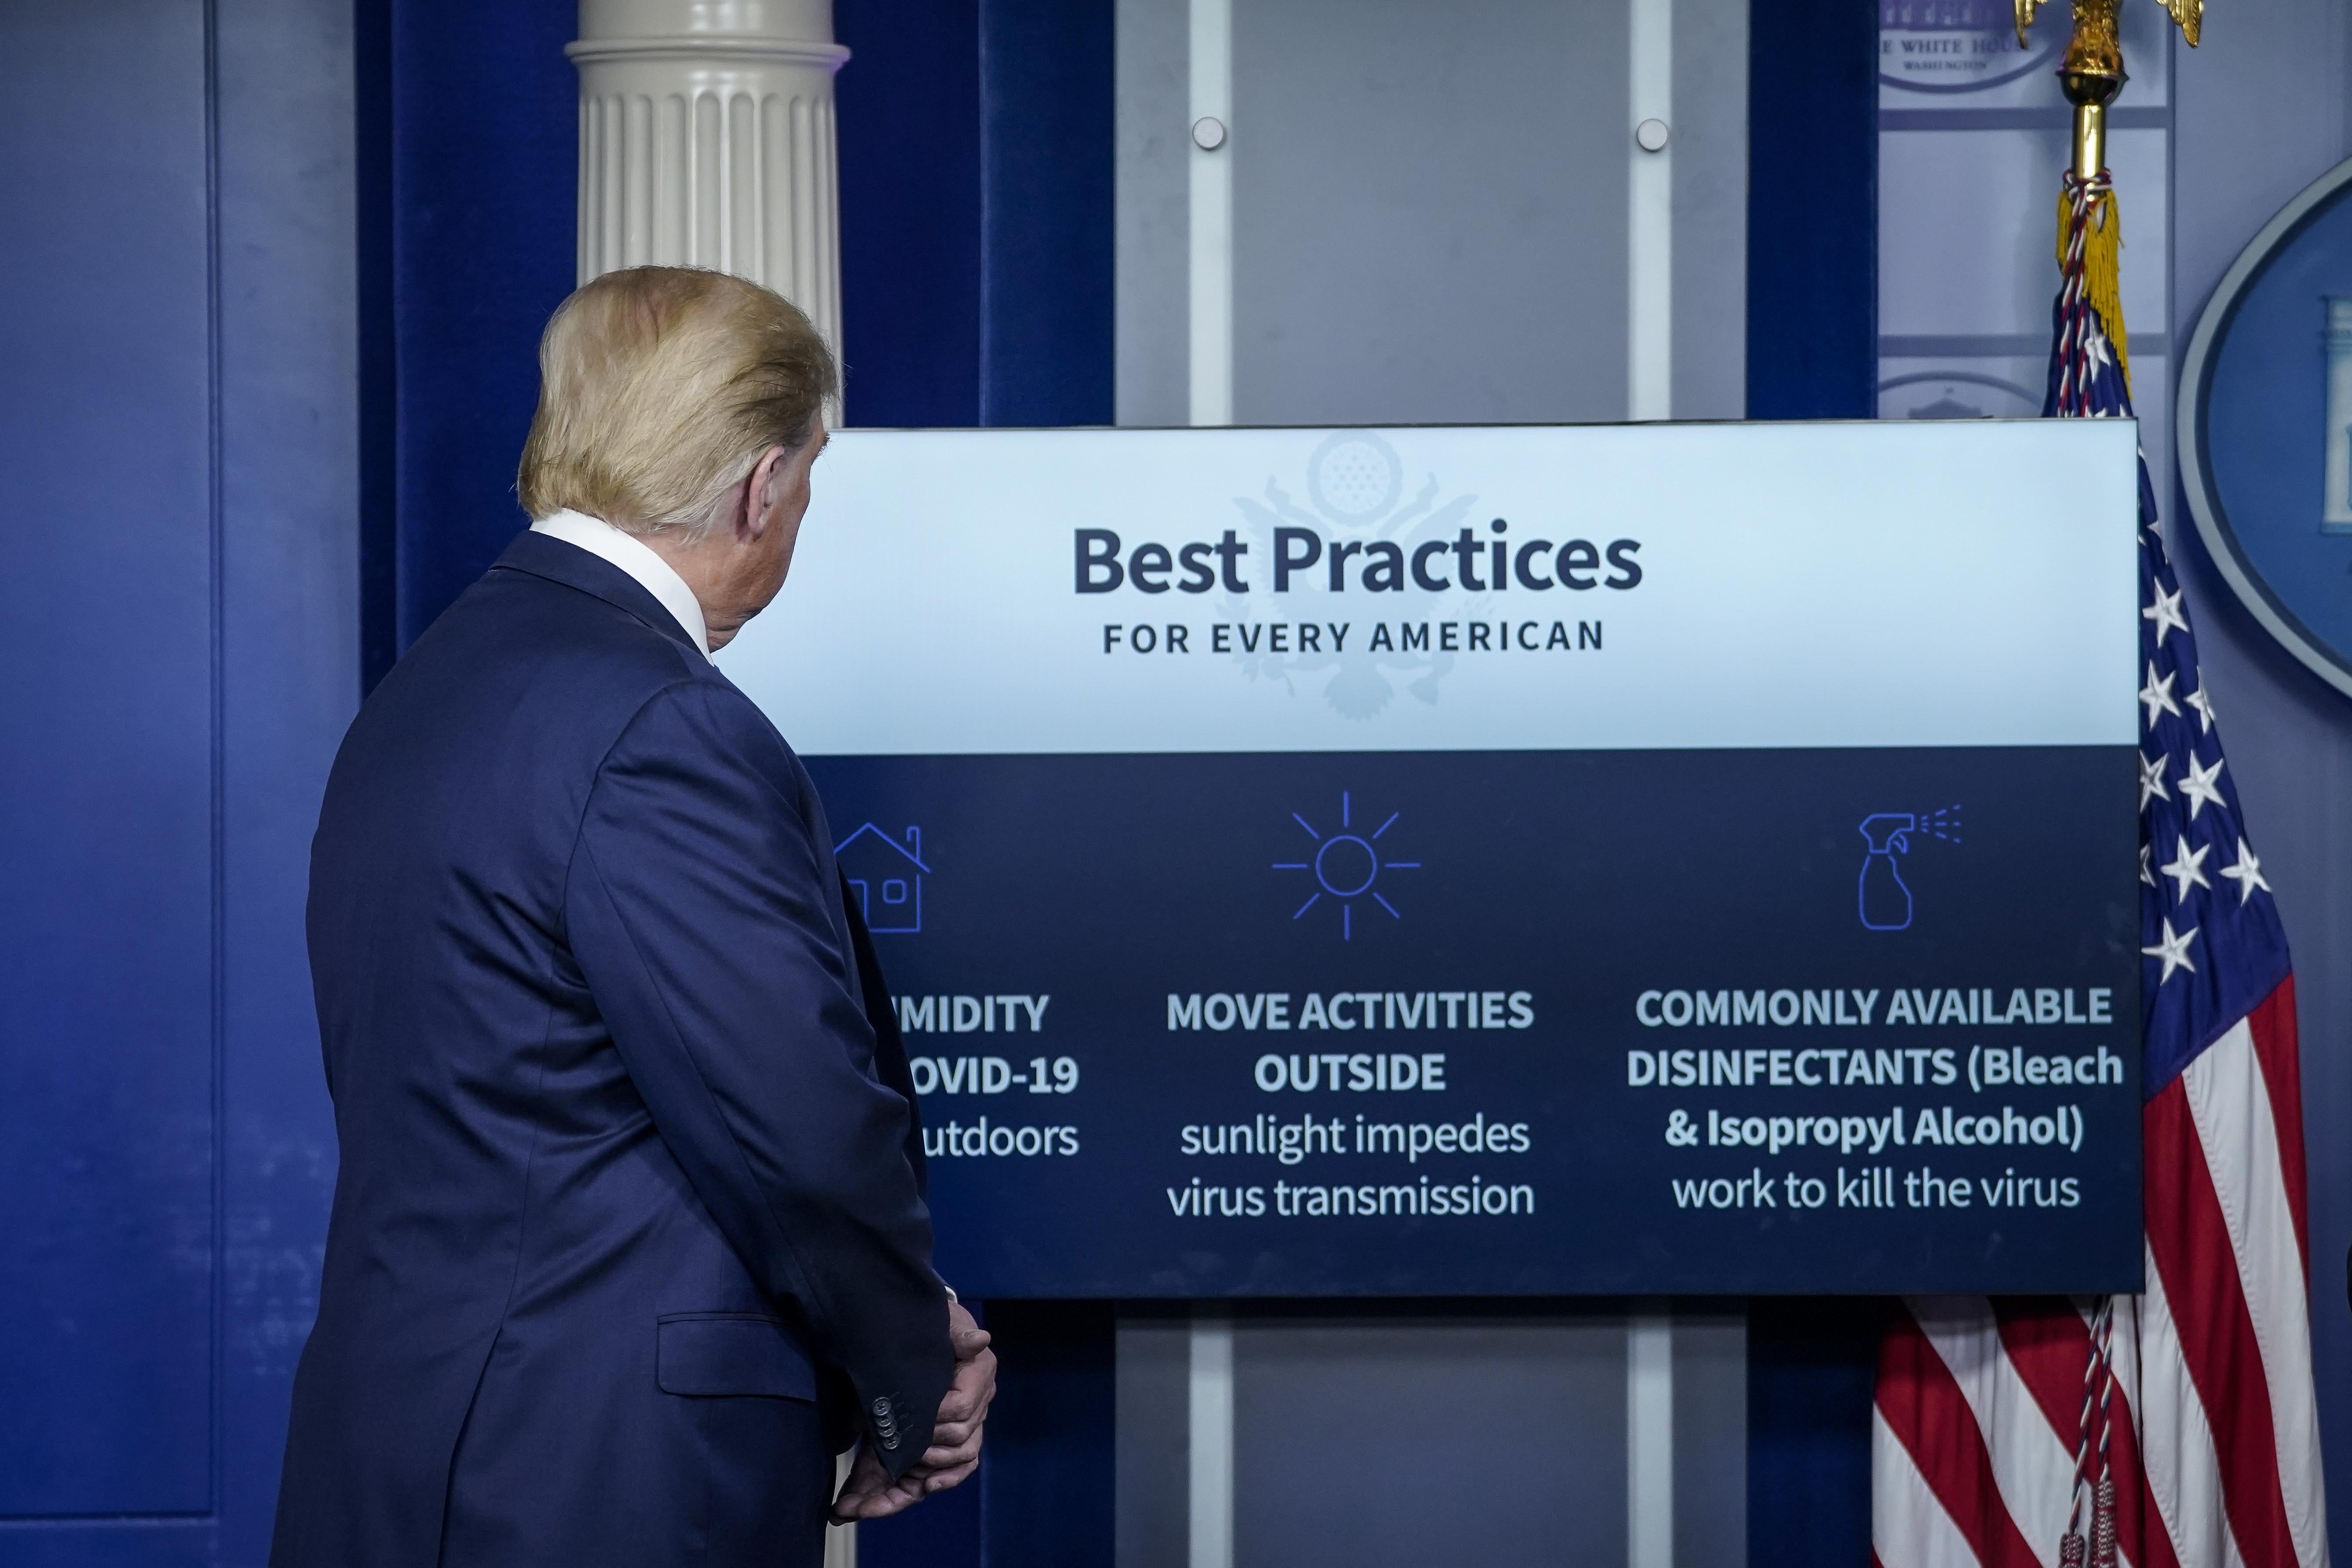 Trump looks at a poster listing "Best Practices for Every American," including "Commonly Available Disinfectants"